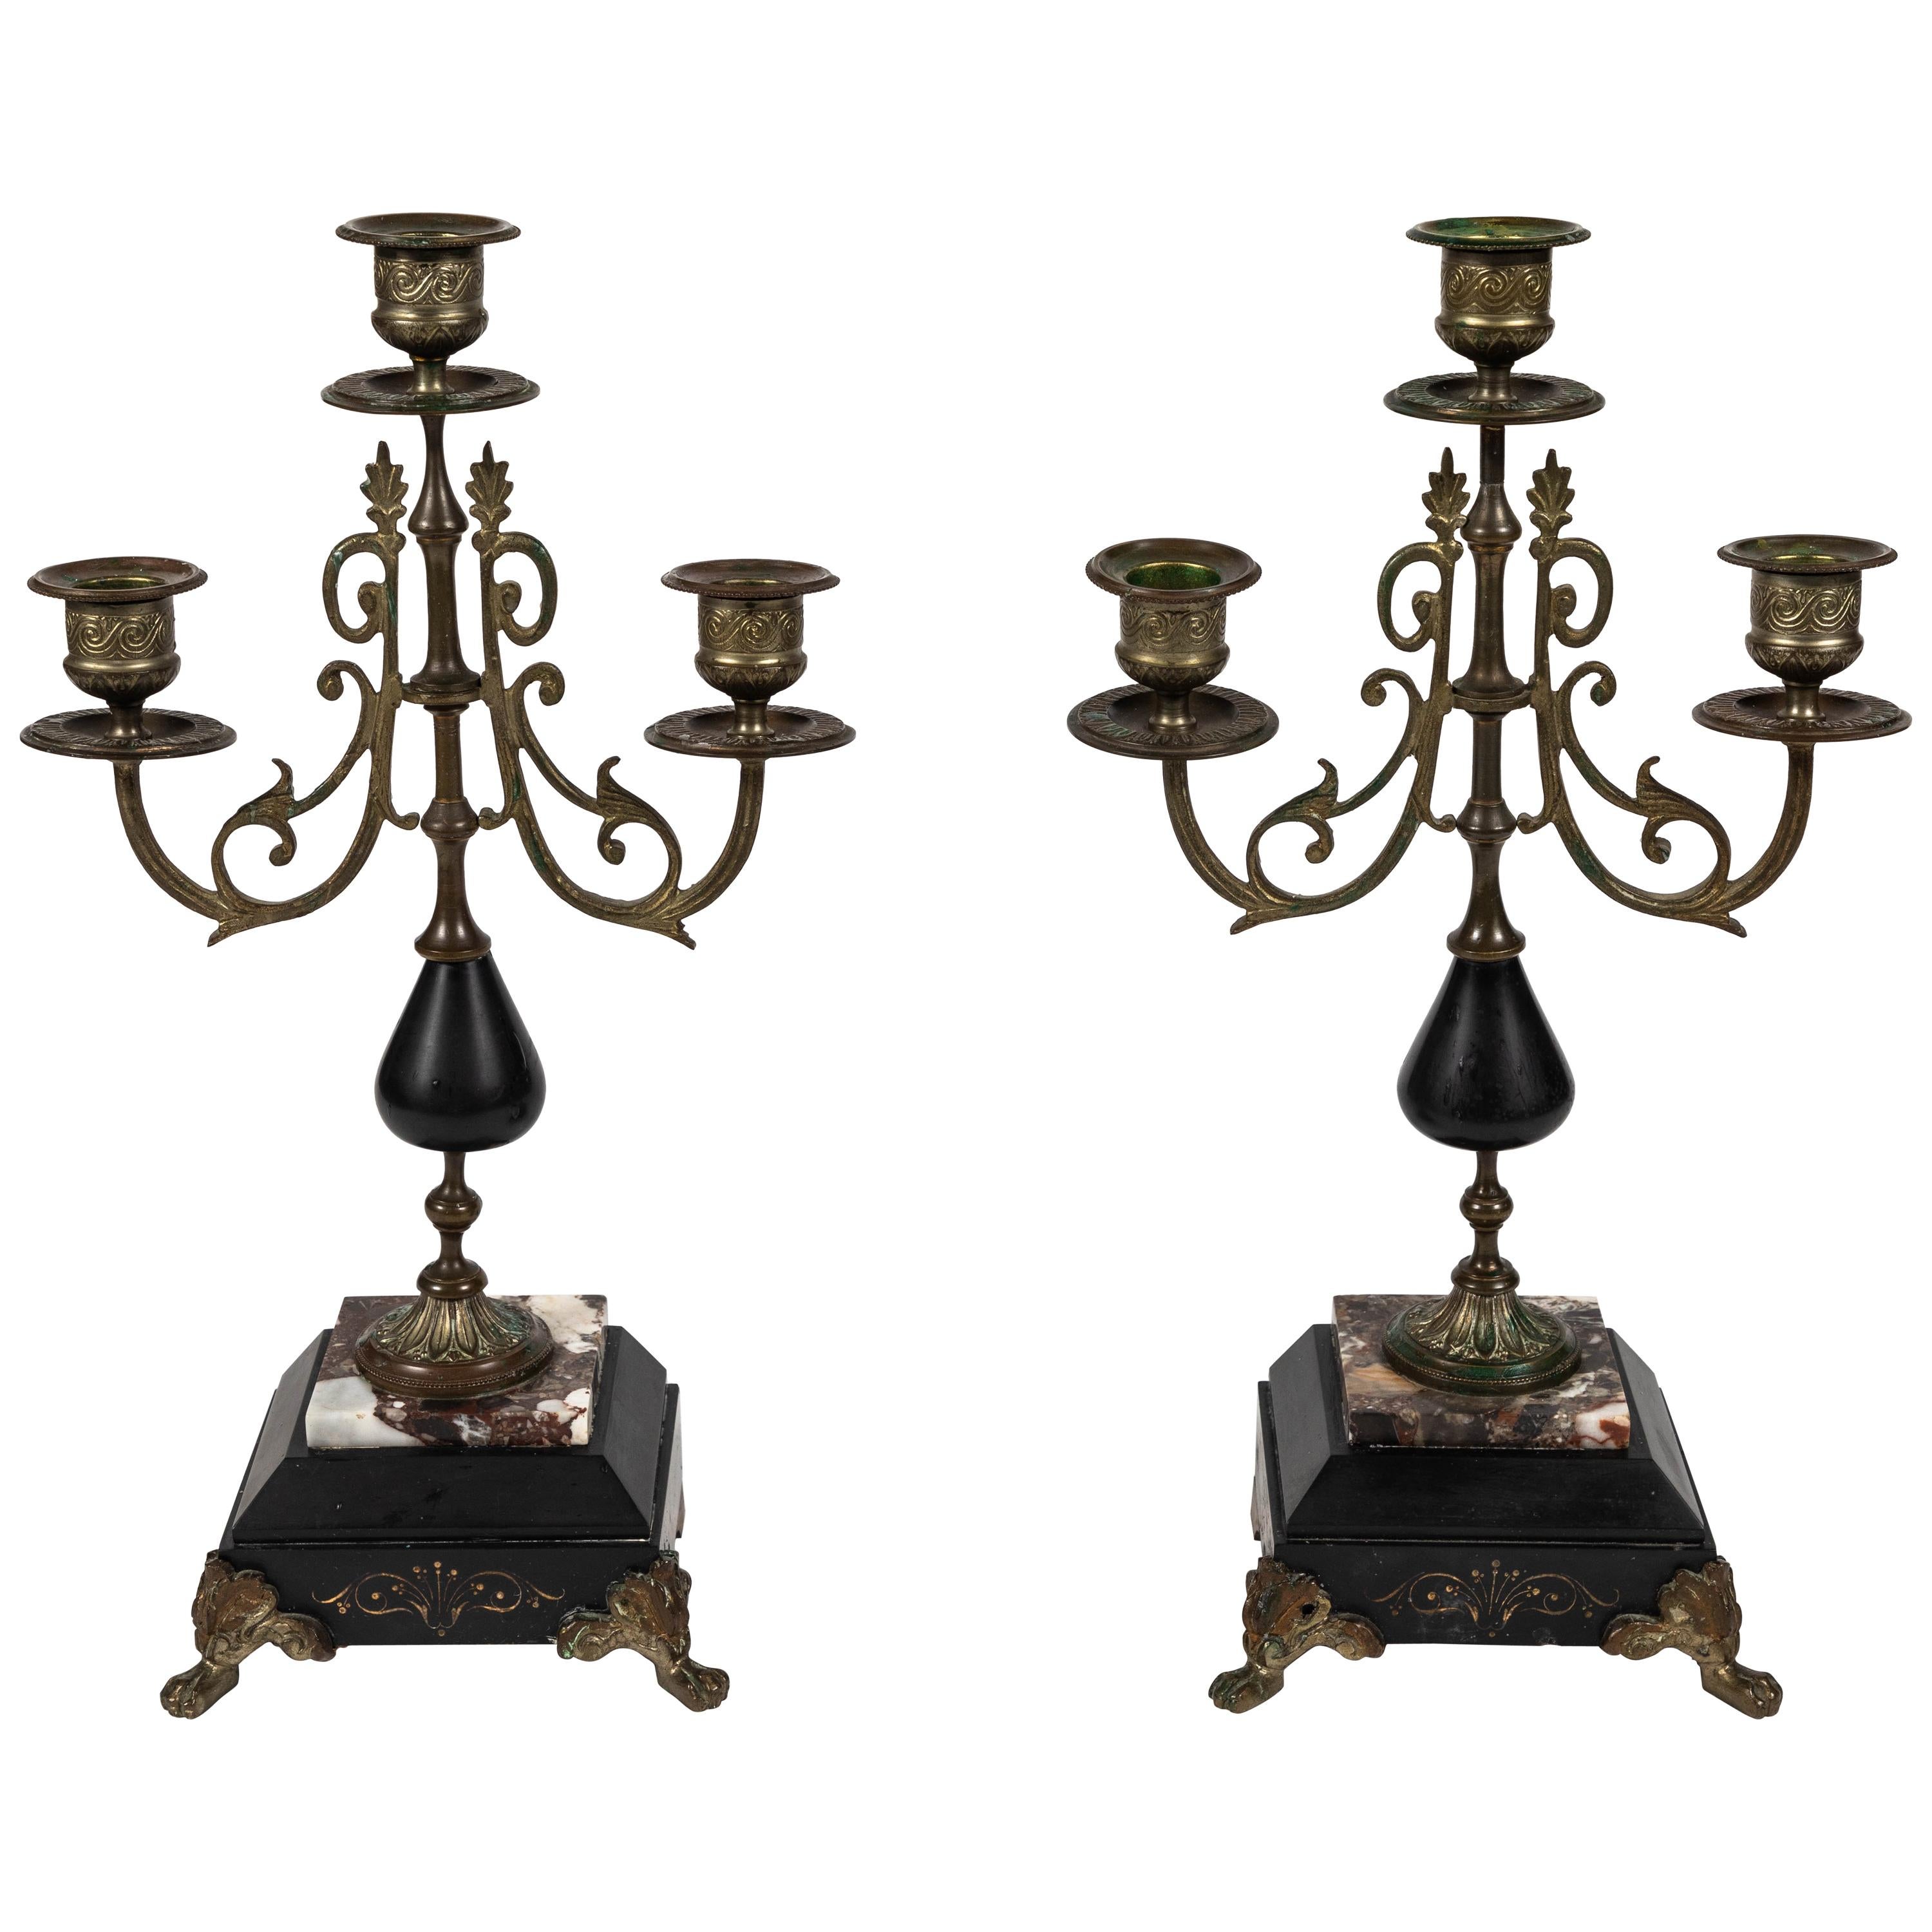 Pair of Antique French Empire Style Marble and Brass Candelabras